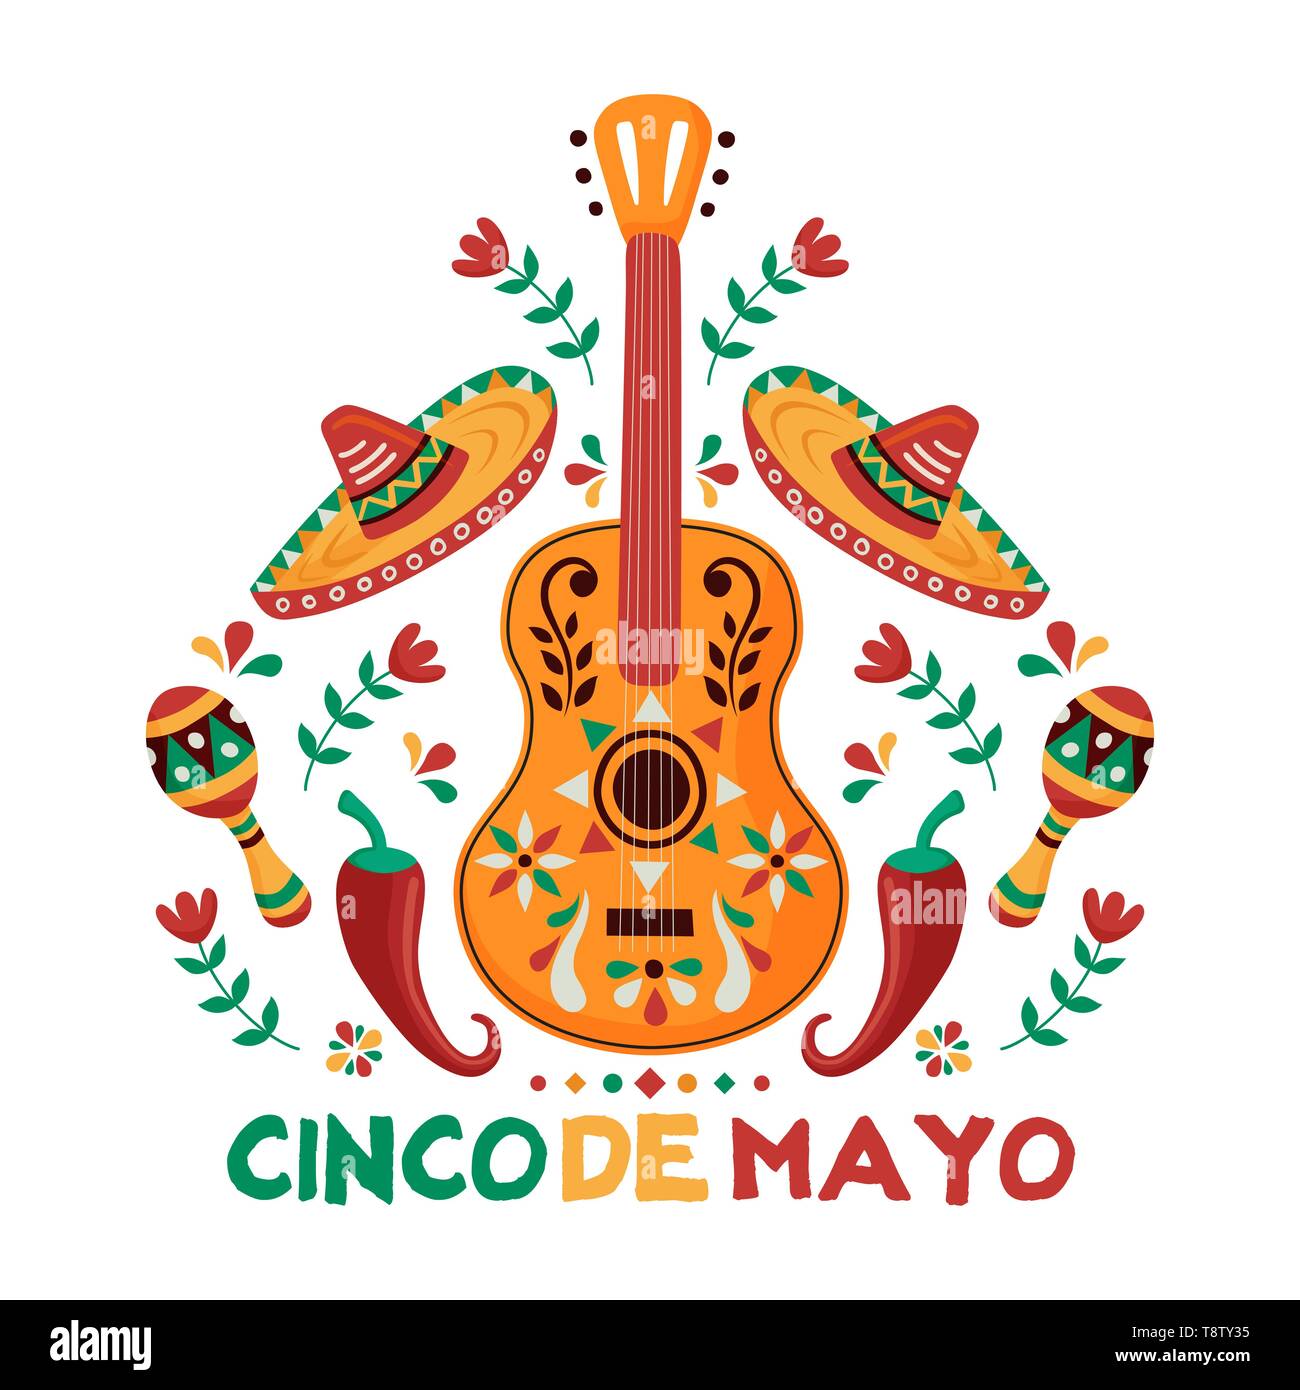 Mariachi guitar Cut Out Stock Images & Pictures - Alamy